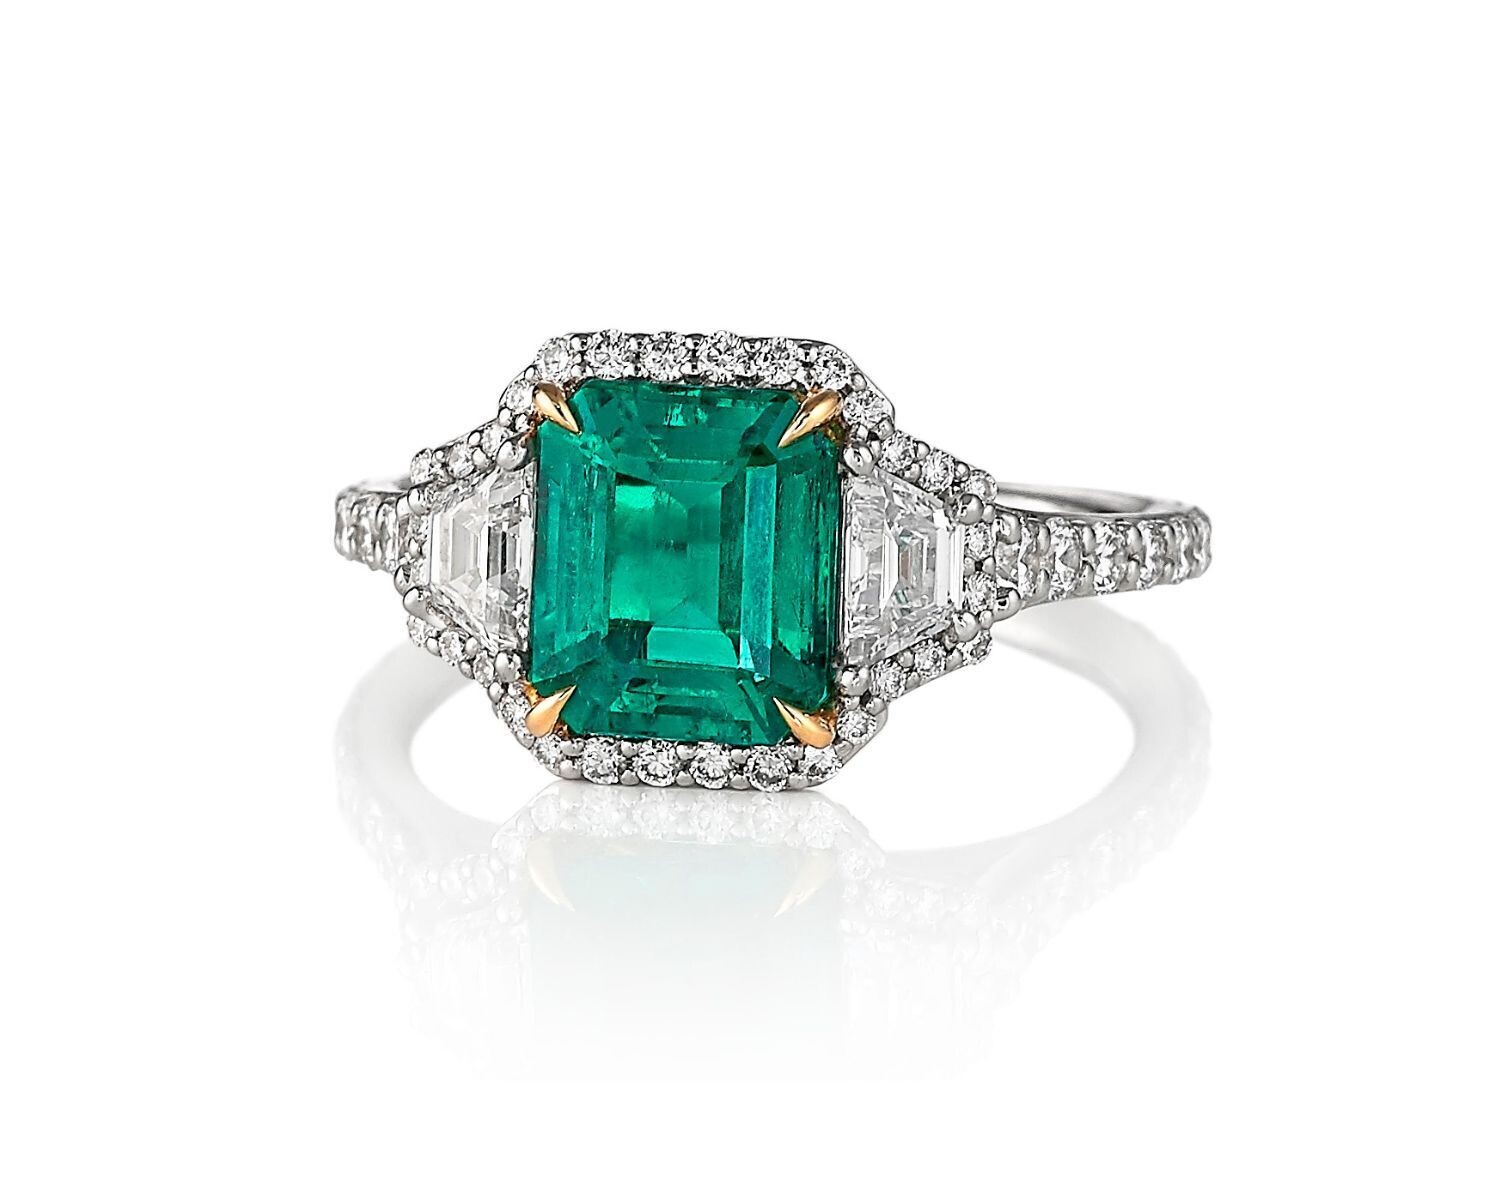 COLOMBIAN EMERALD PAVE RING